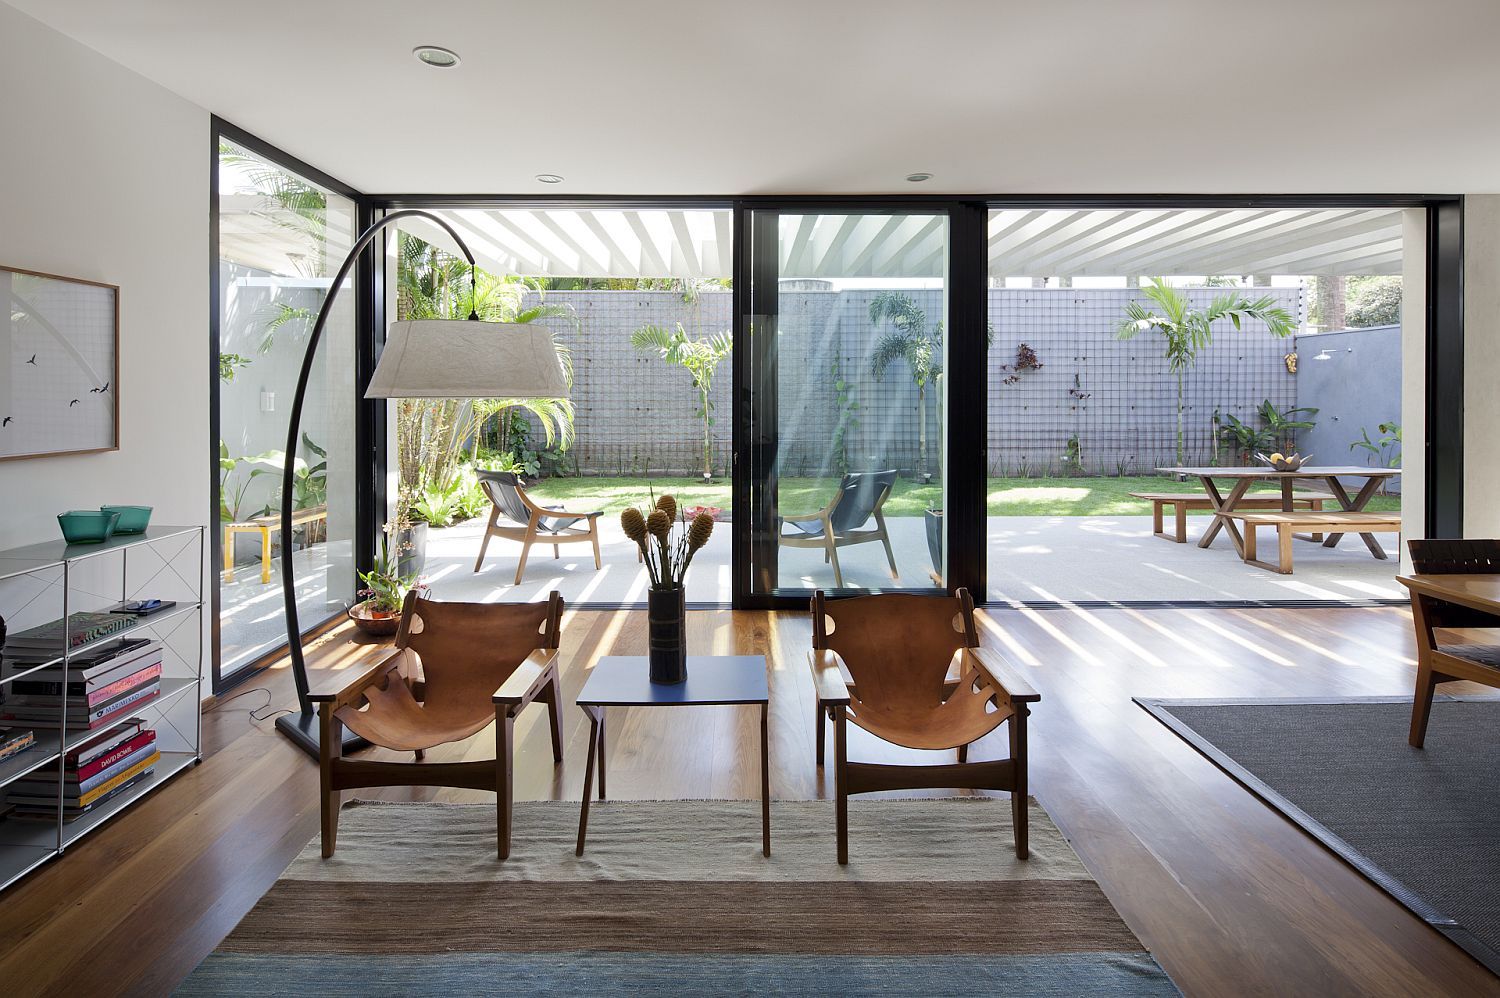 Dark framed glass doors connect the living area with the outdoor dining and backyard